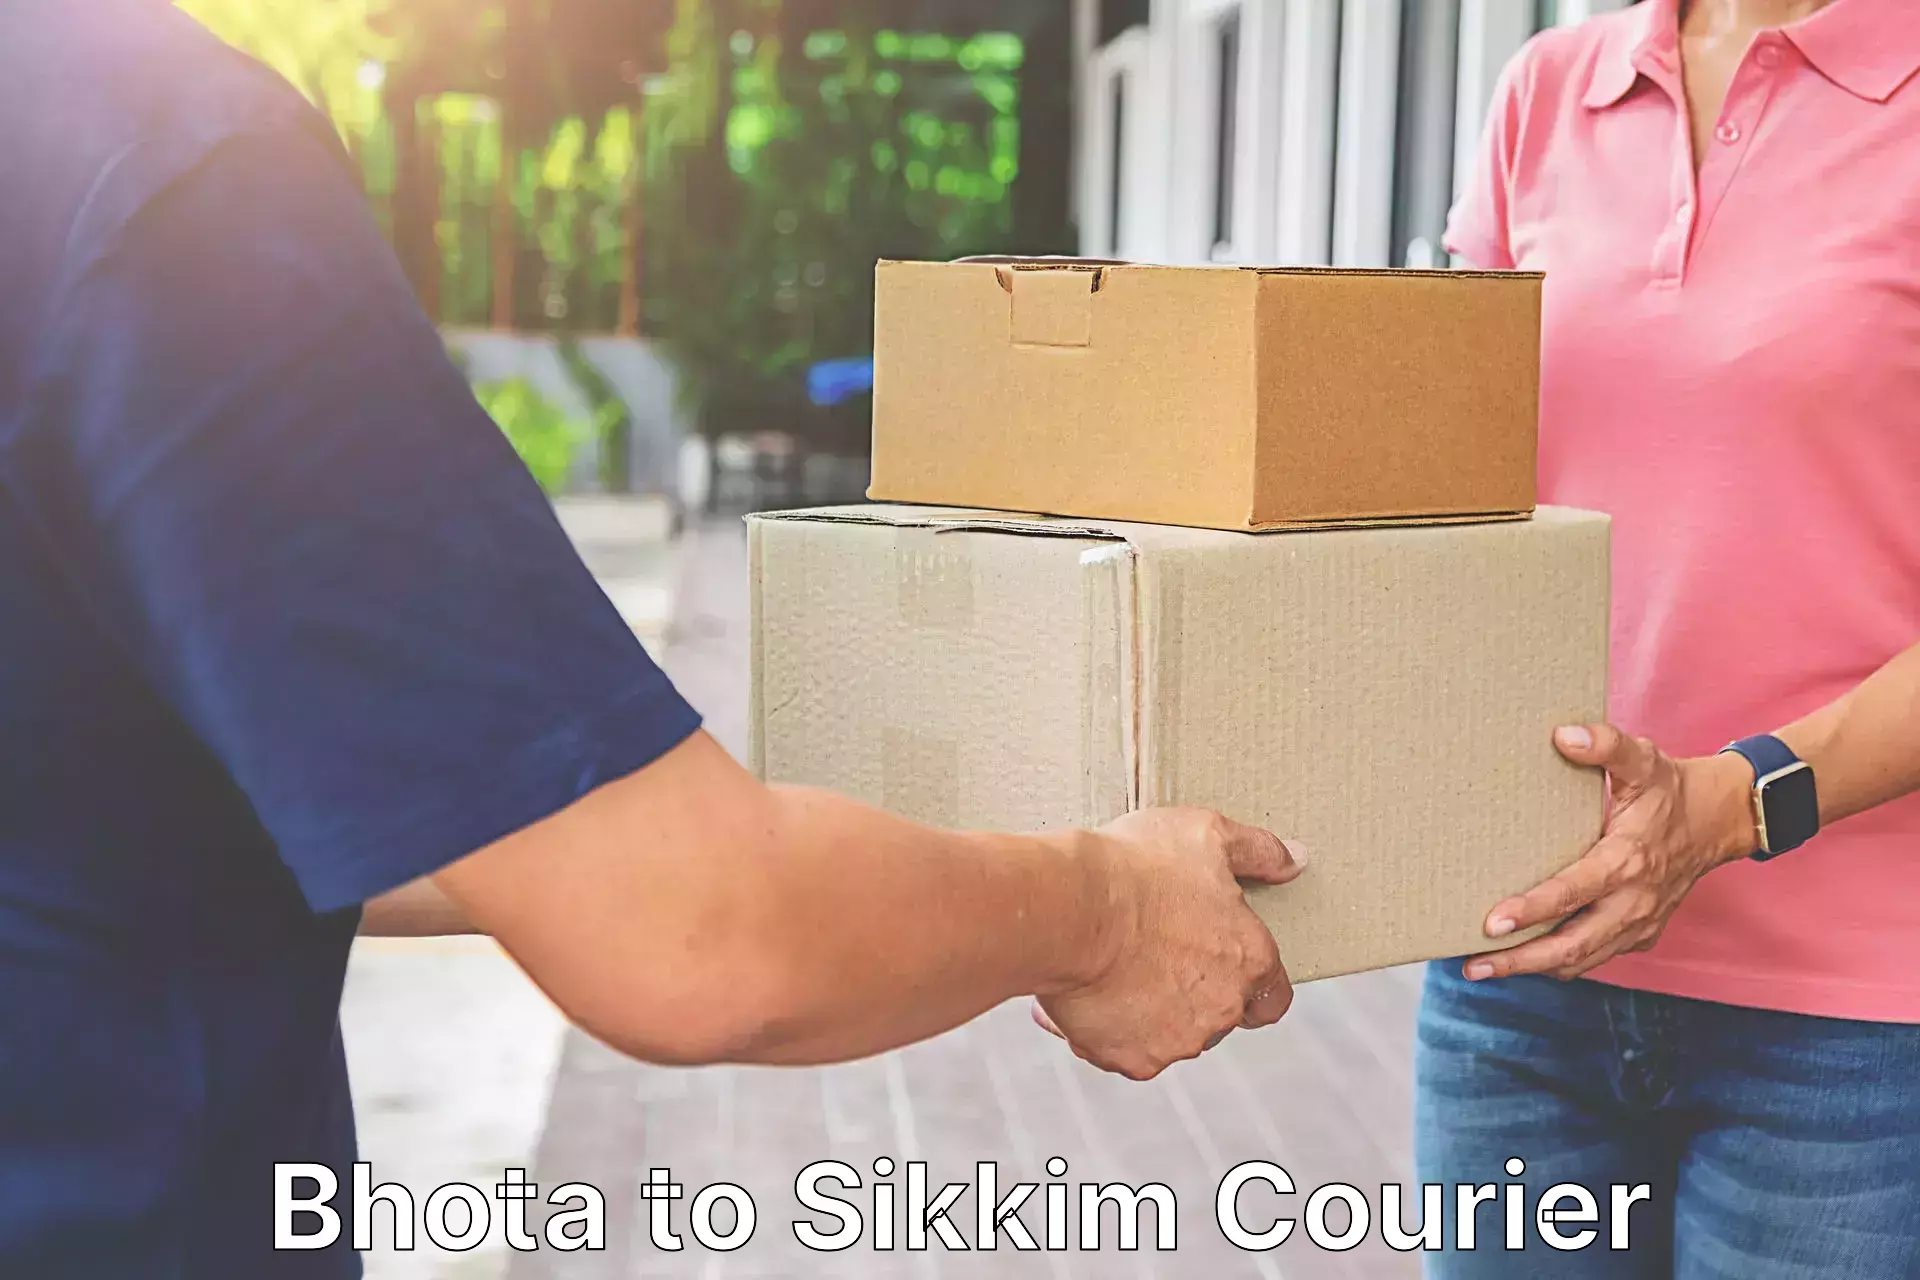 Global courier networks Bhota to Pelling